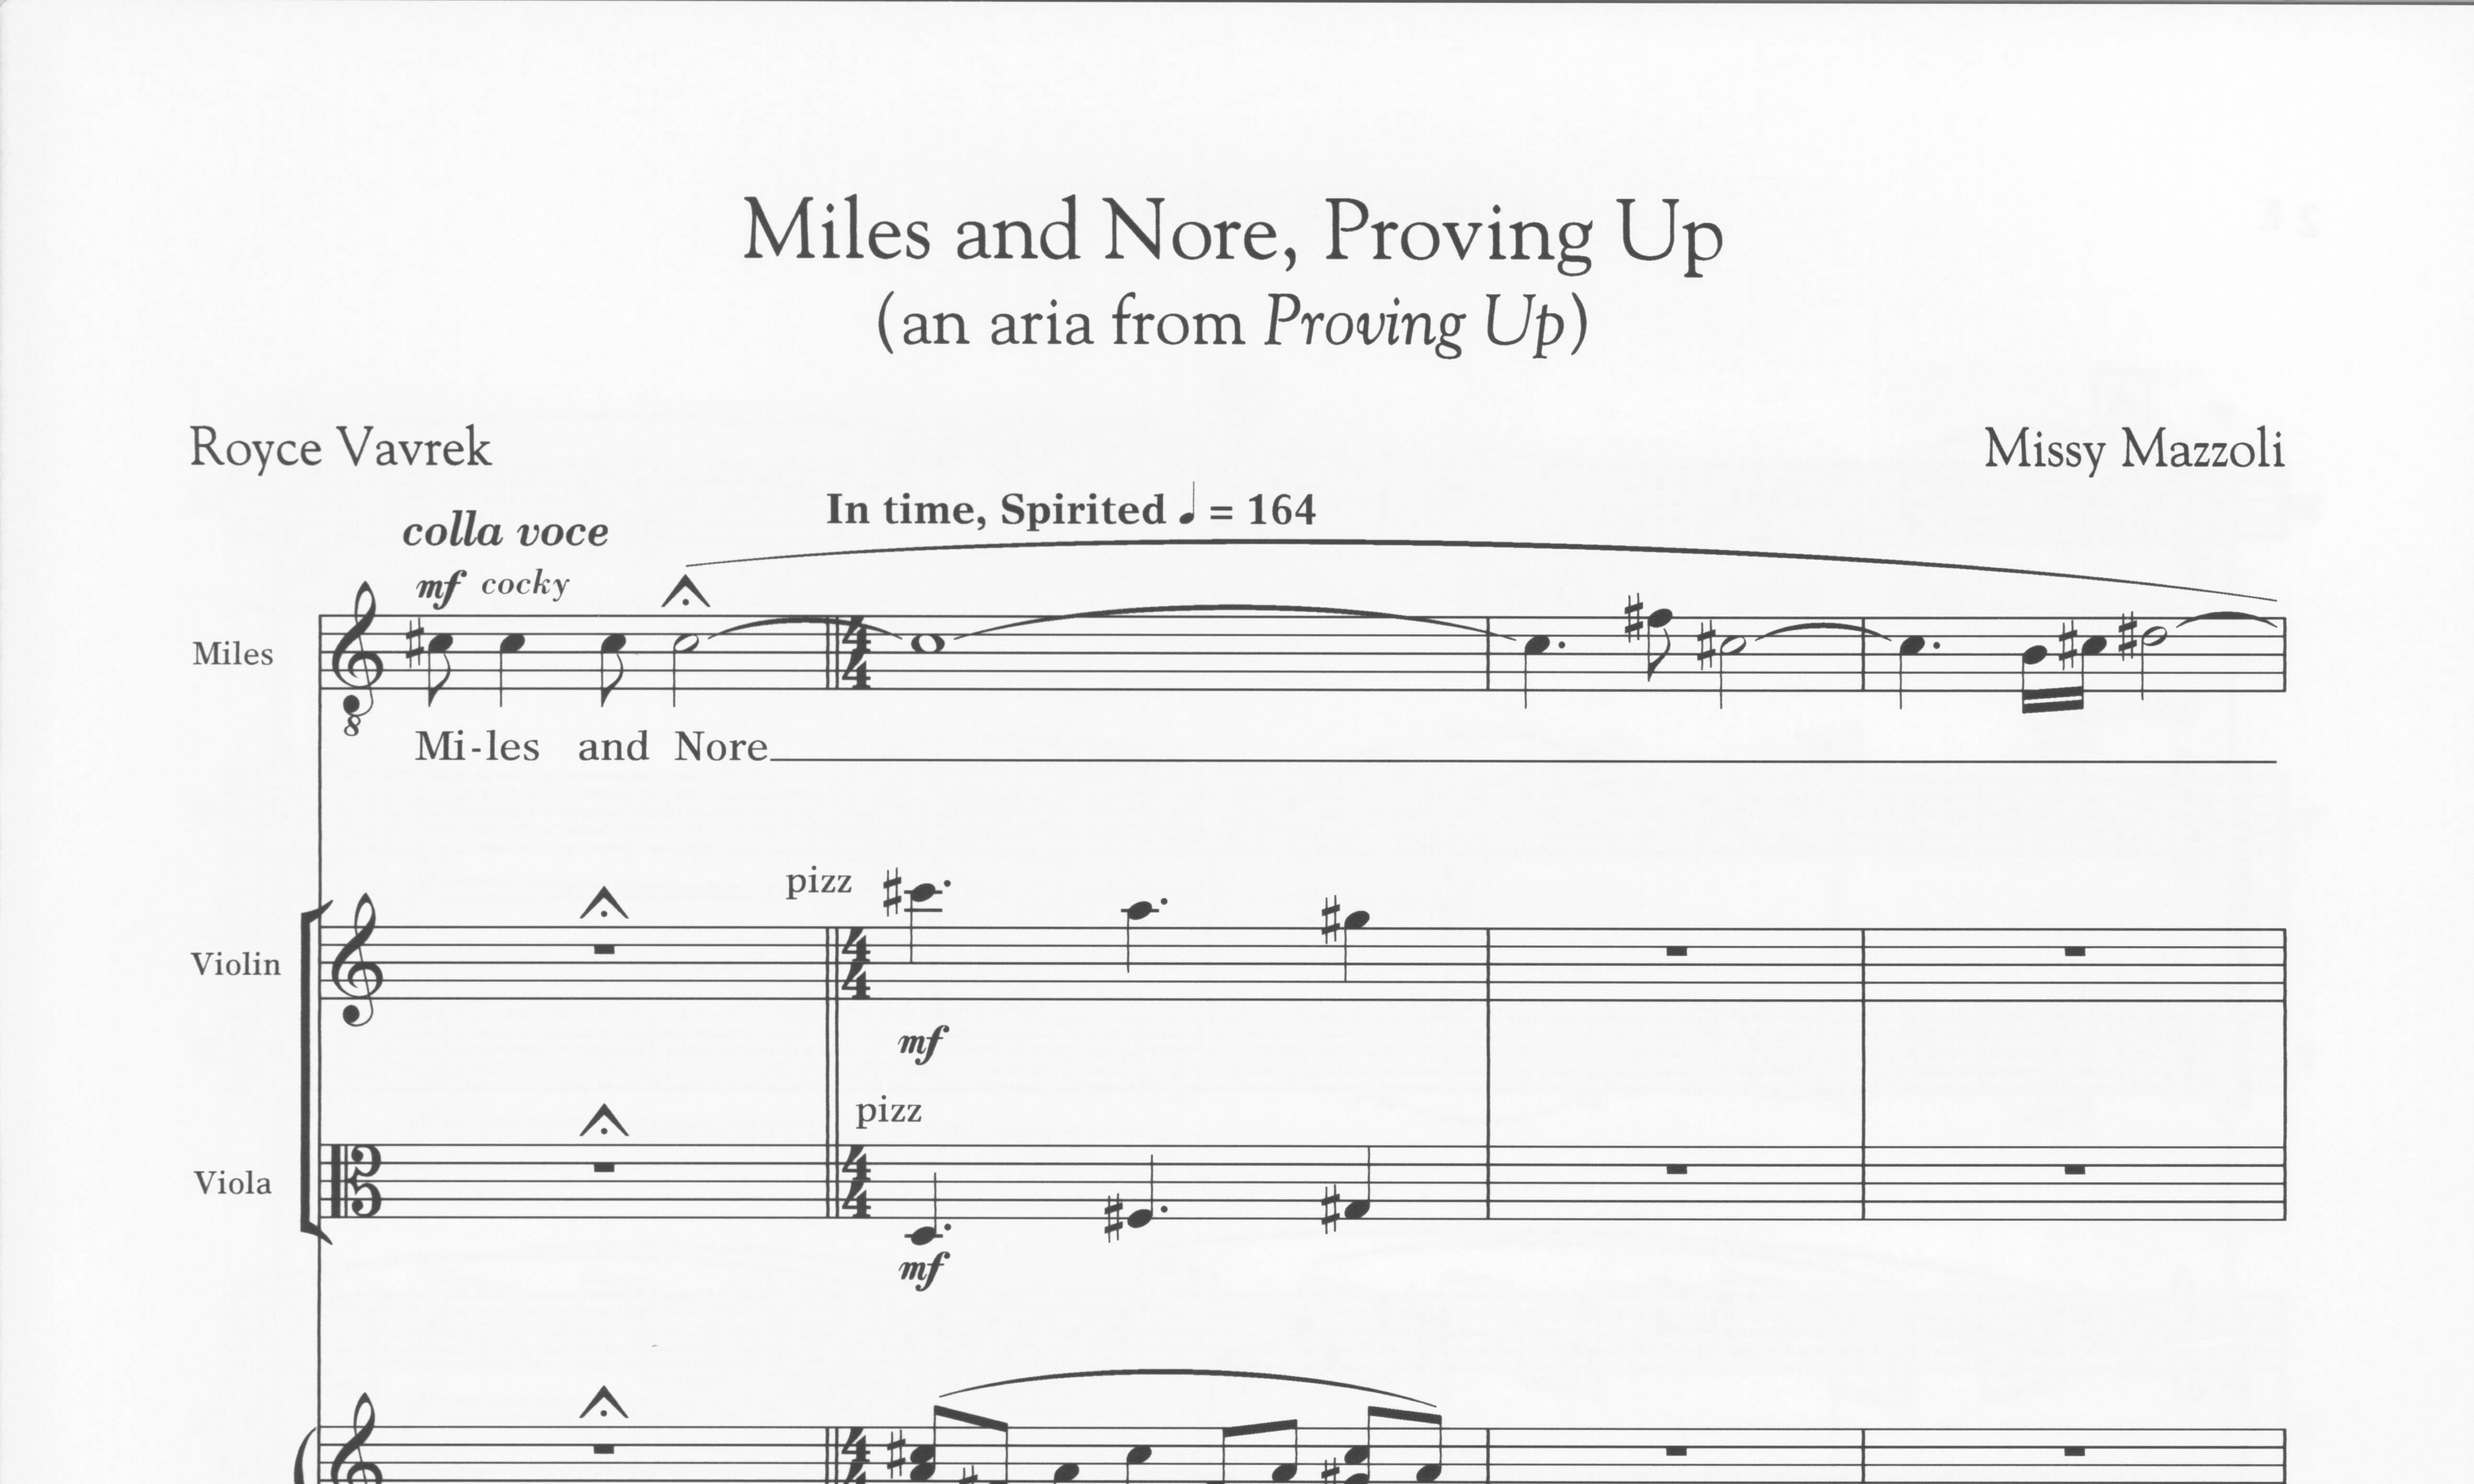 Miles and Nore, Proving up - Missy Mazzoli